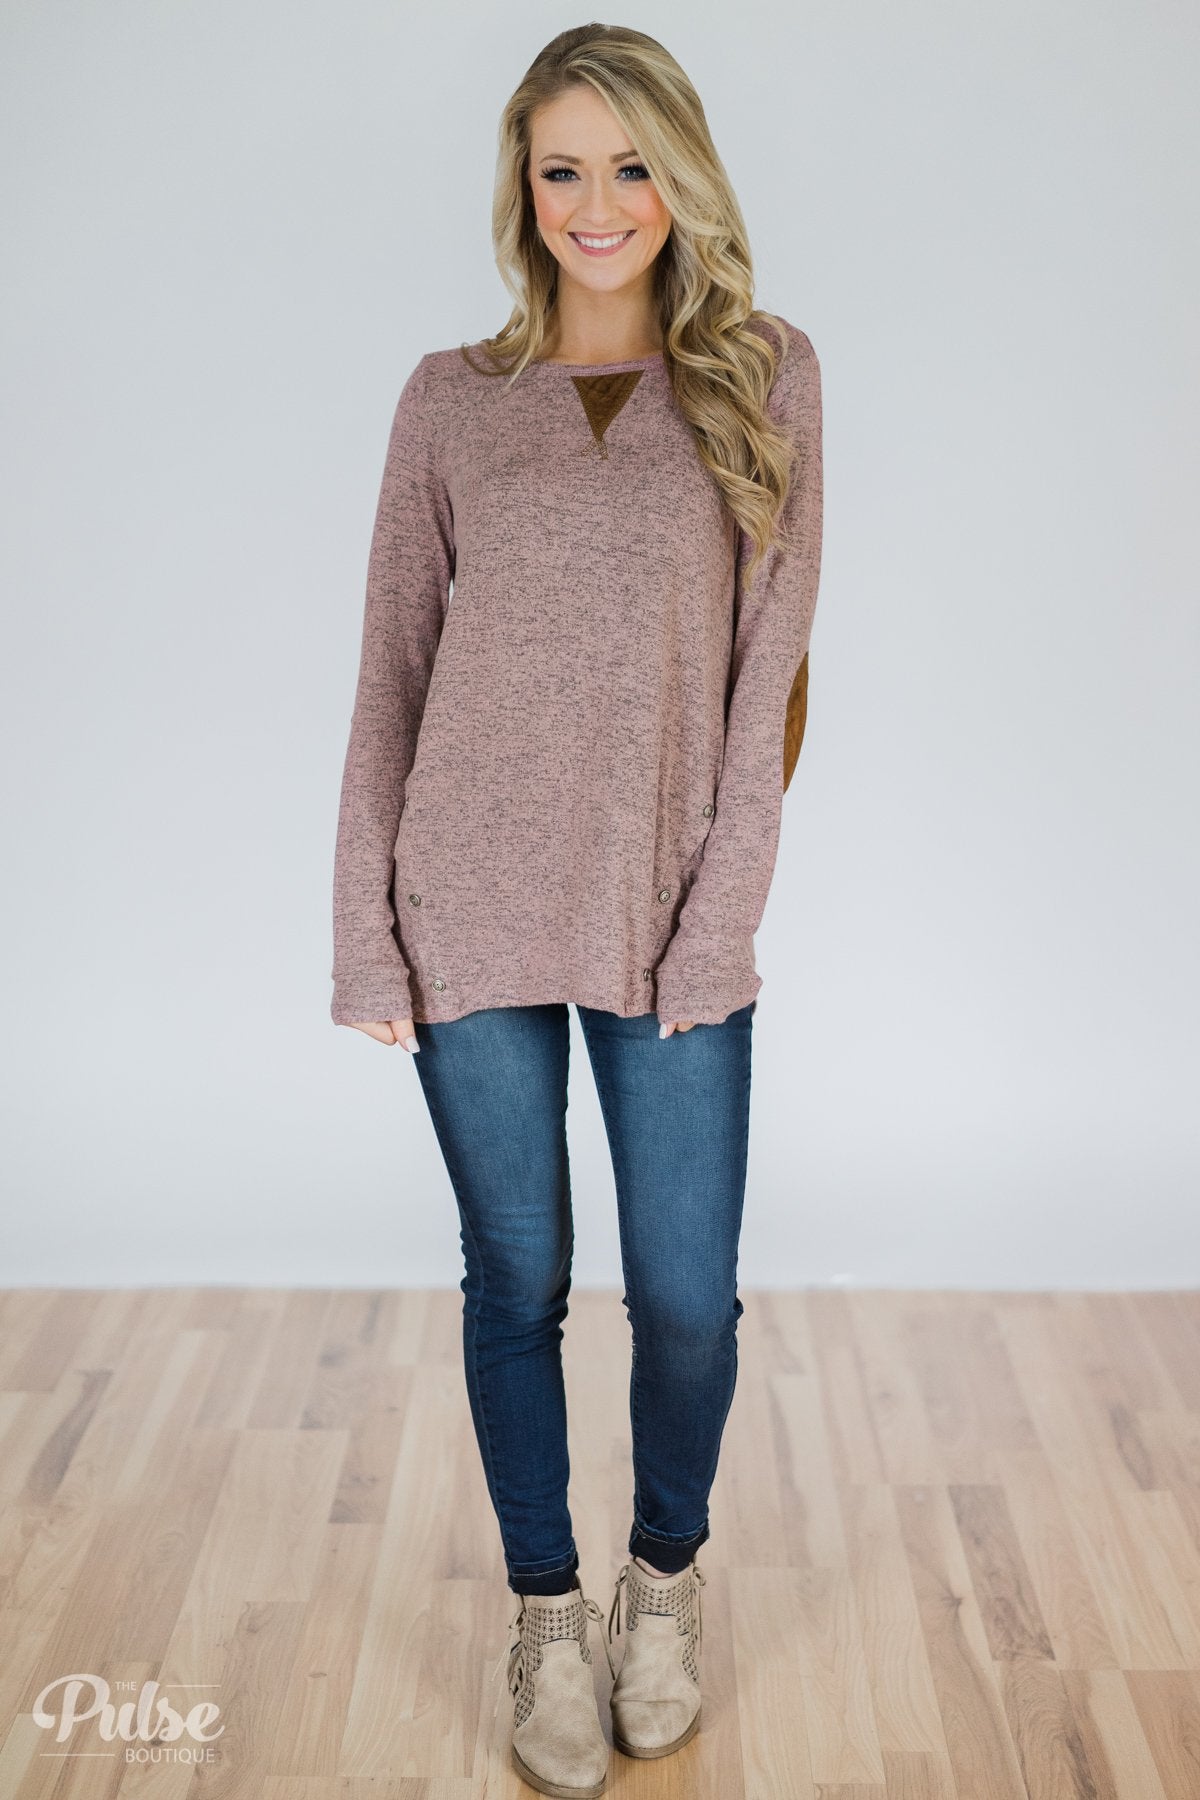 Perfect Pair Button & Elbow Patch Top- Heathered Mauve